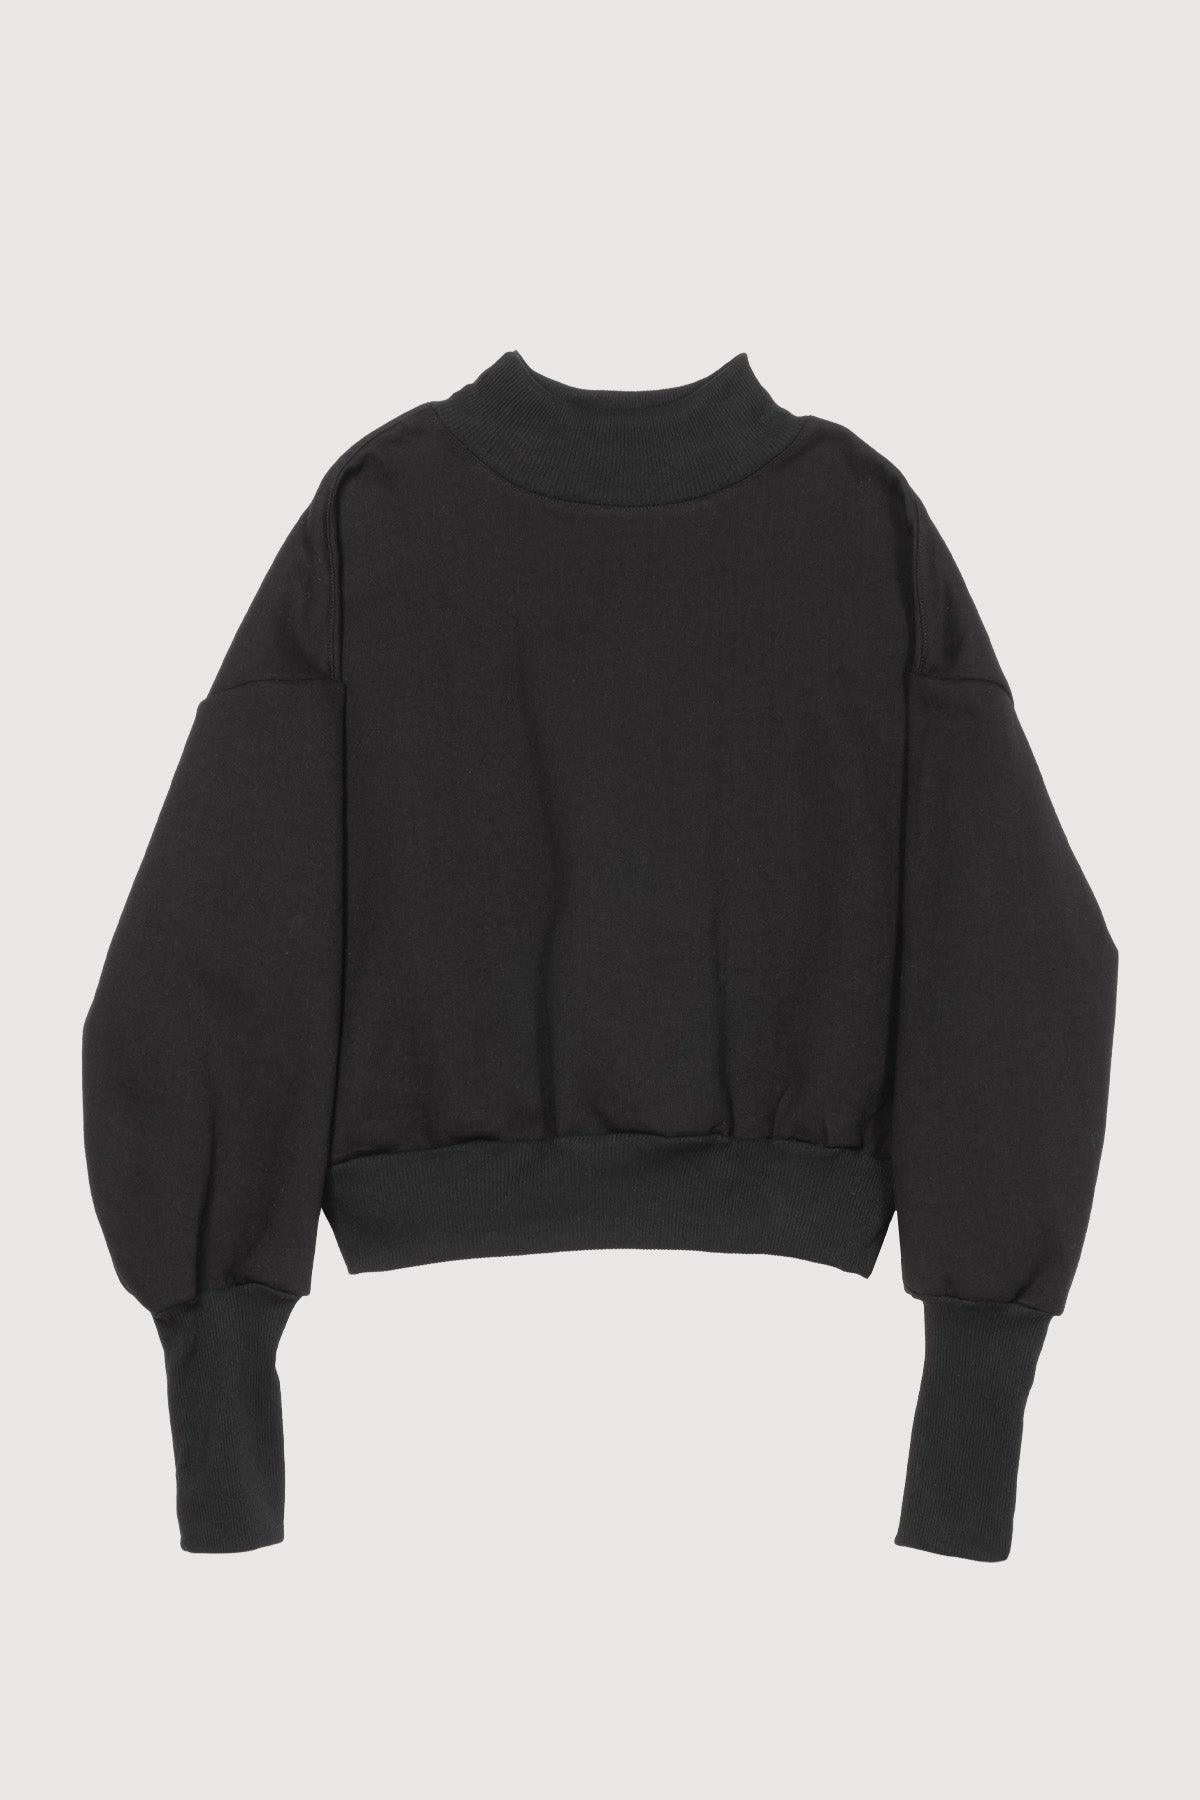 FORM CROPPED CREWNECK - MERCY HOUSE